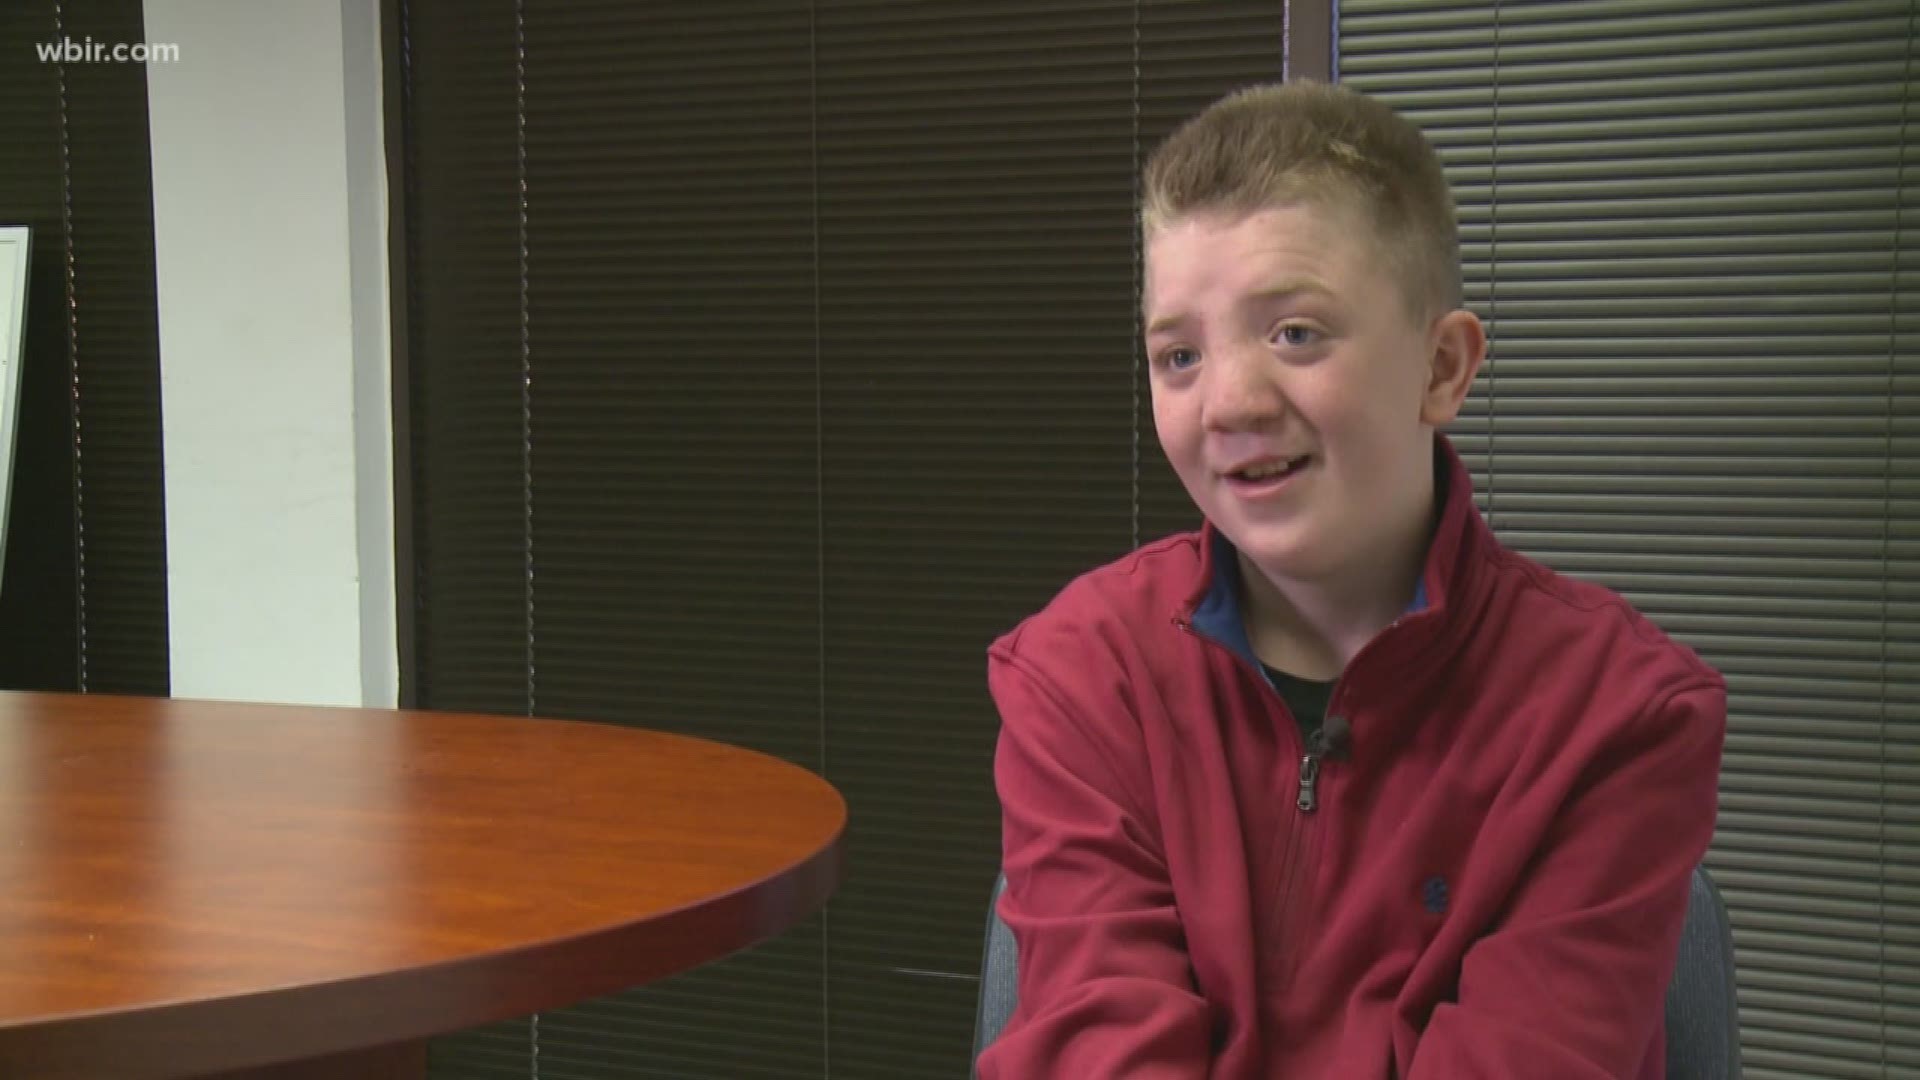 Dec. 11, 2017: An East Tennessee boy who shared his story of bullying in a viral video said he's surprised by the national reaction he's received.